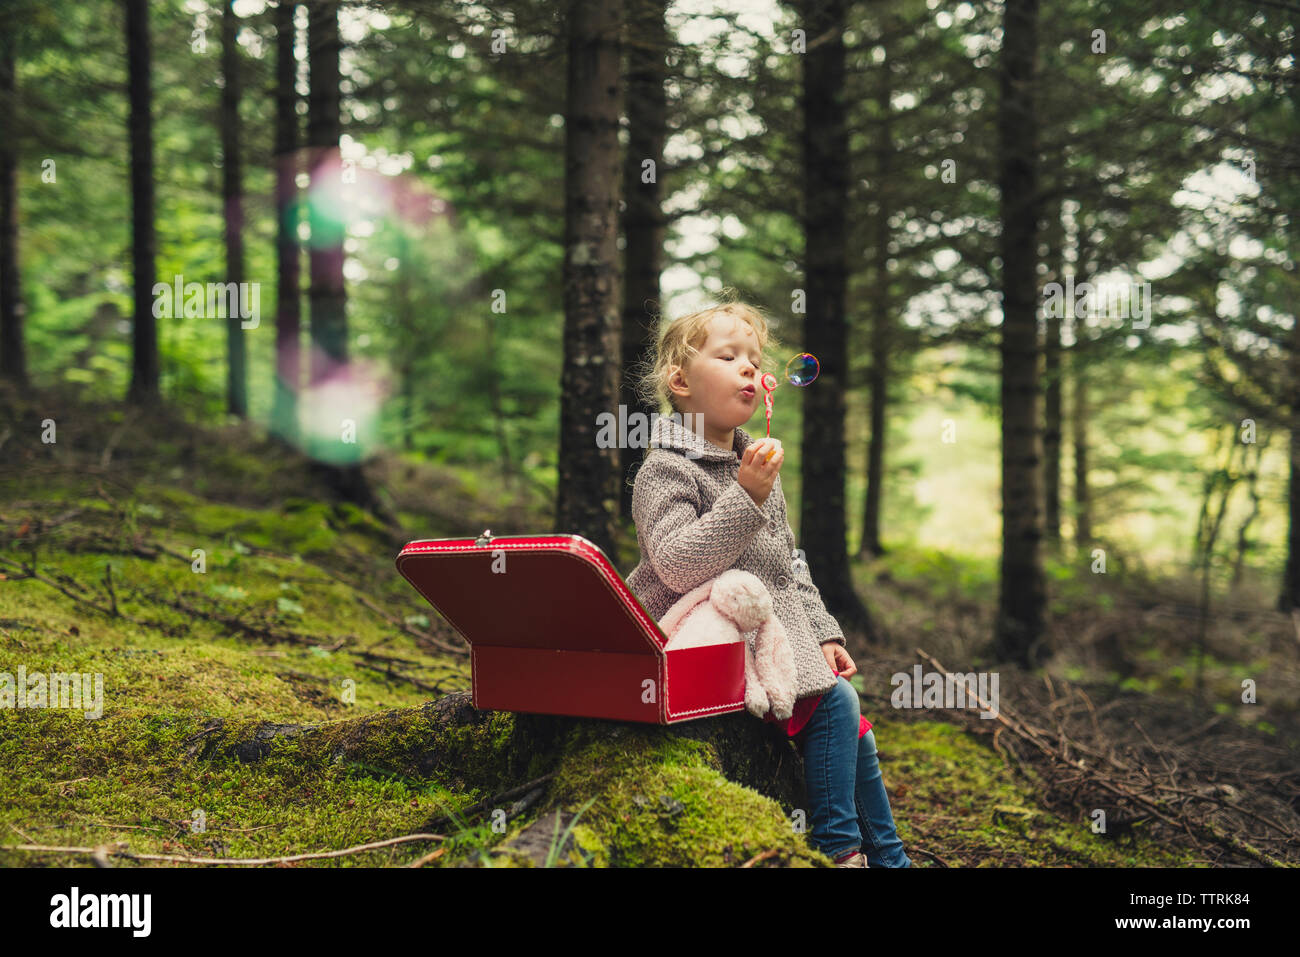 Girl blowing bubbles while sitting at forest Stock Photo